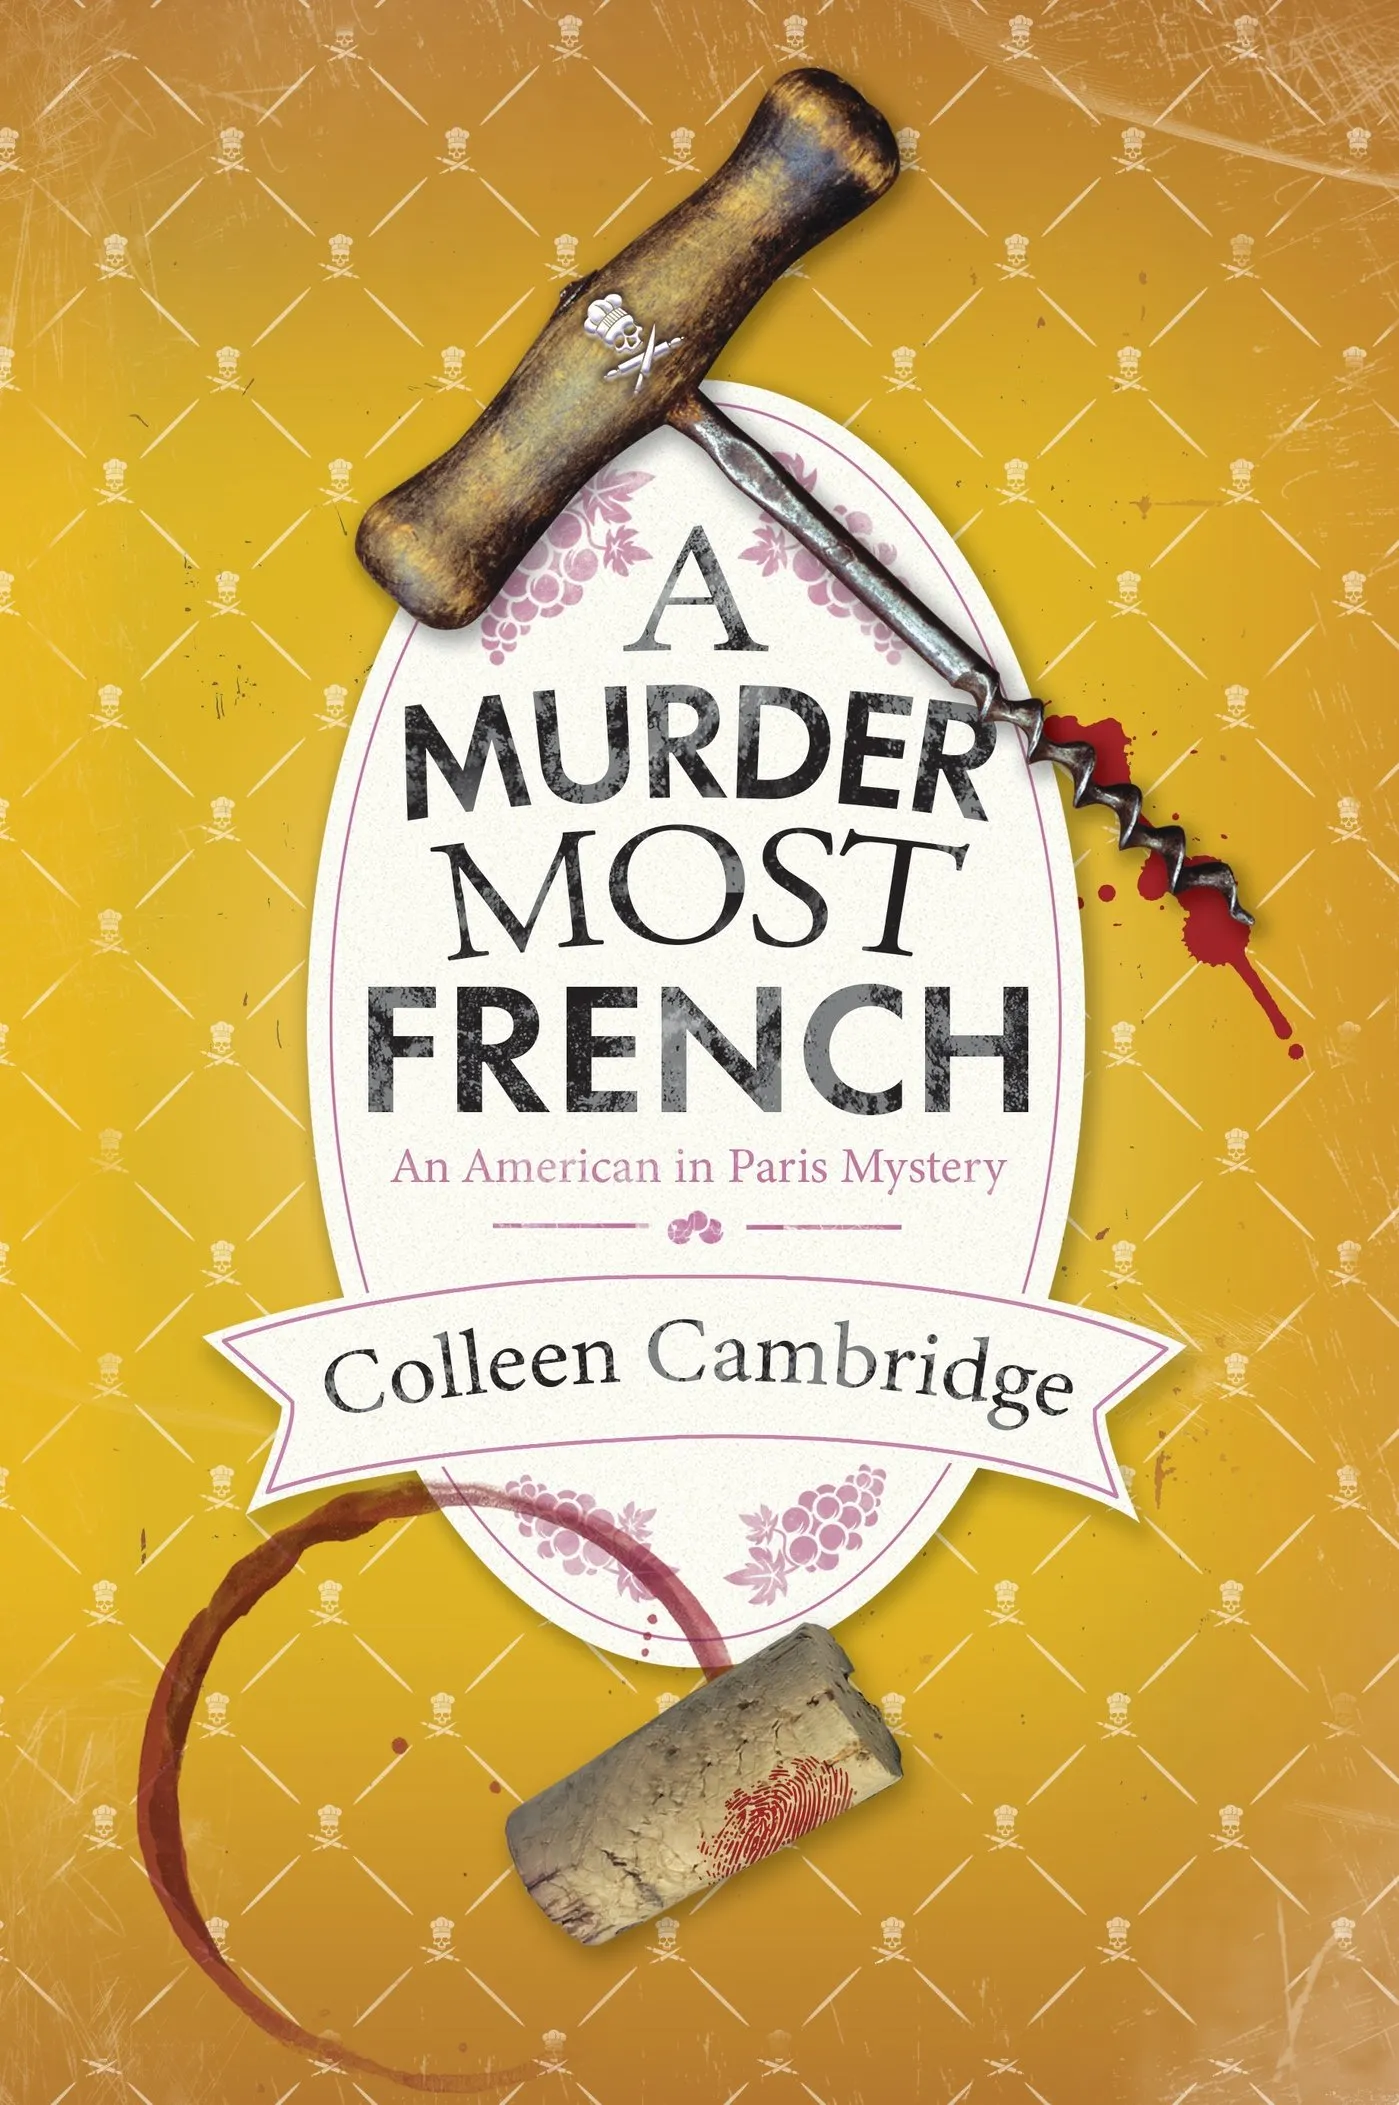 A Murder Most French (An American in Paris Mystery #2)